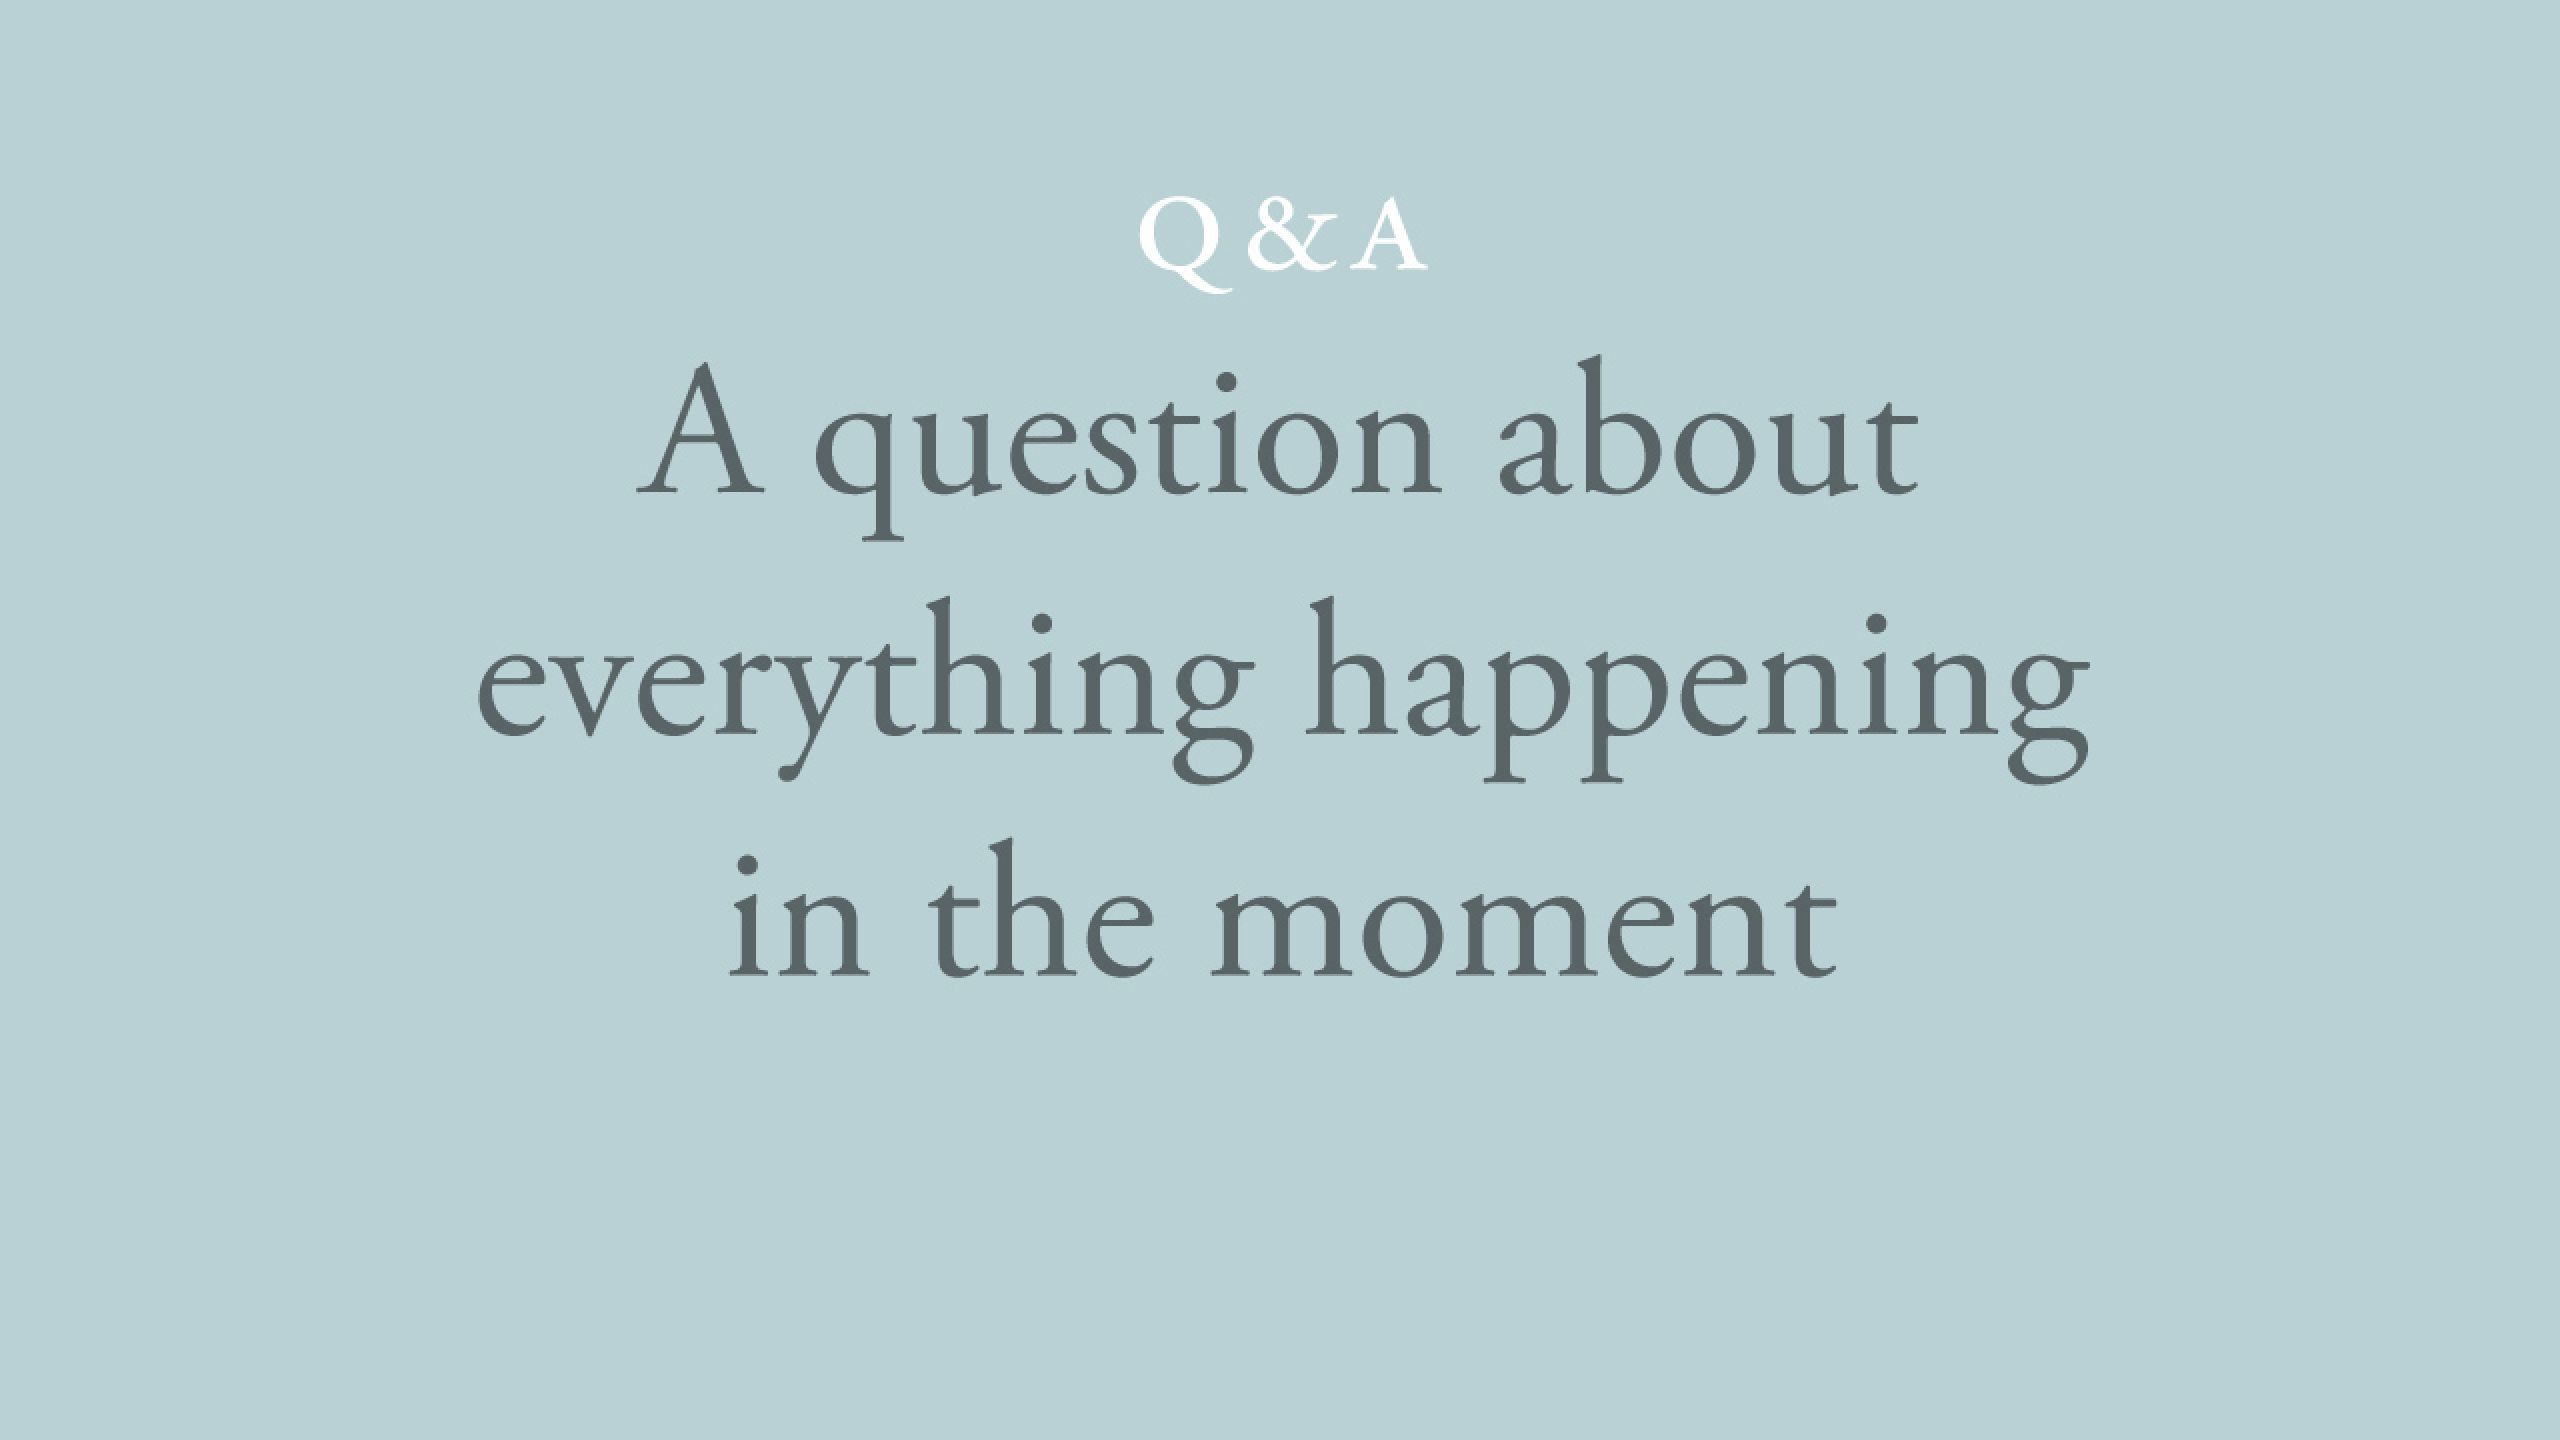 What is meant by 'Everything is happening in this moment'?